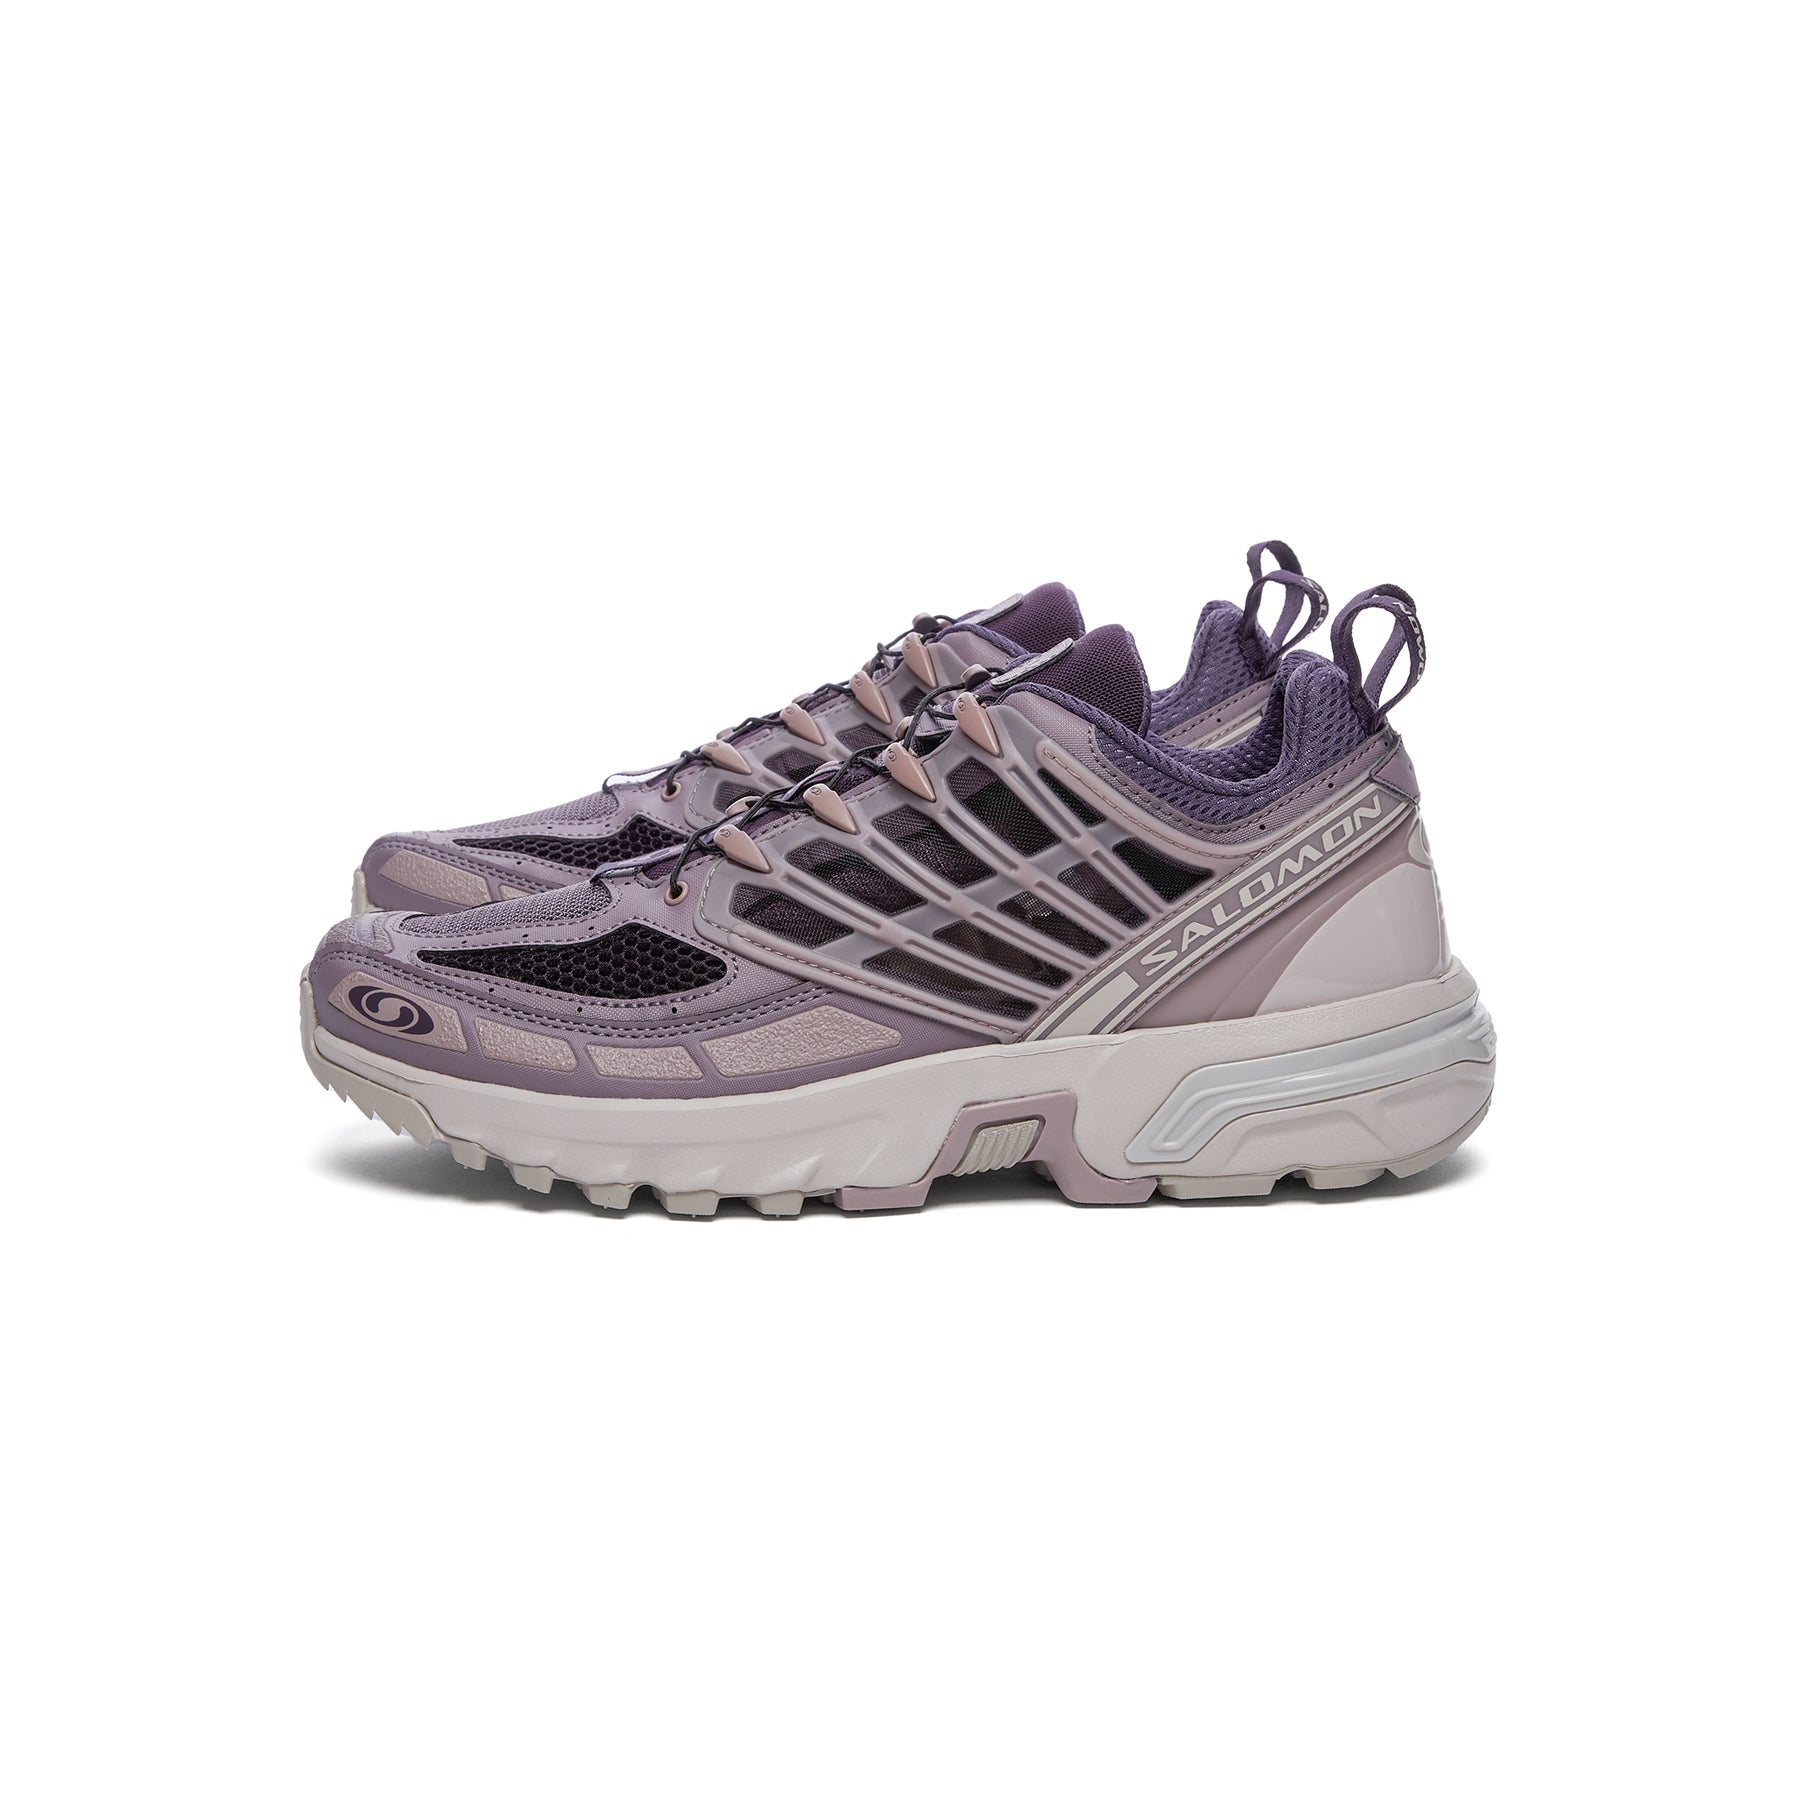 Salomon ACS Pro (Nightshade/Moonscape/Ashes of Roses) – CNCPTS